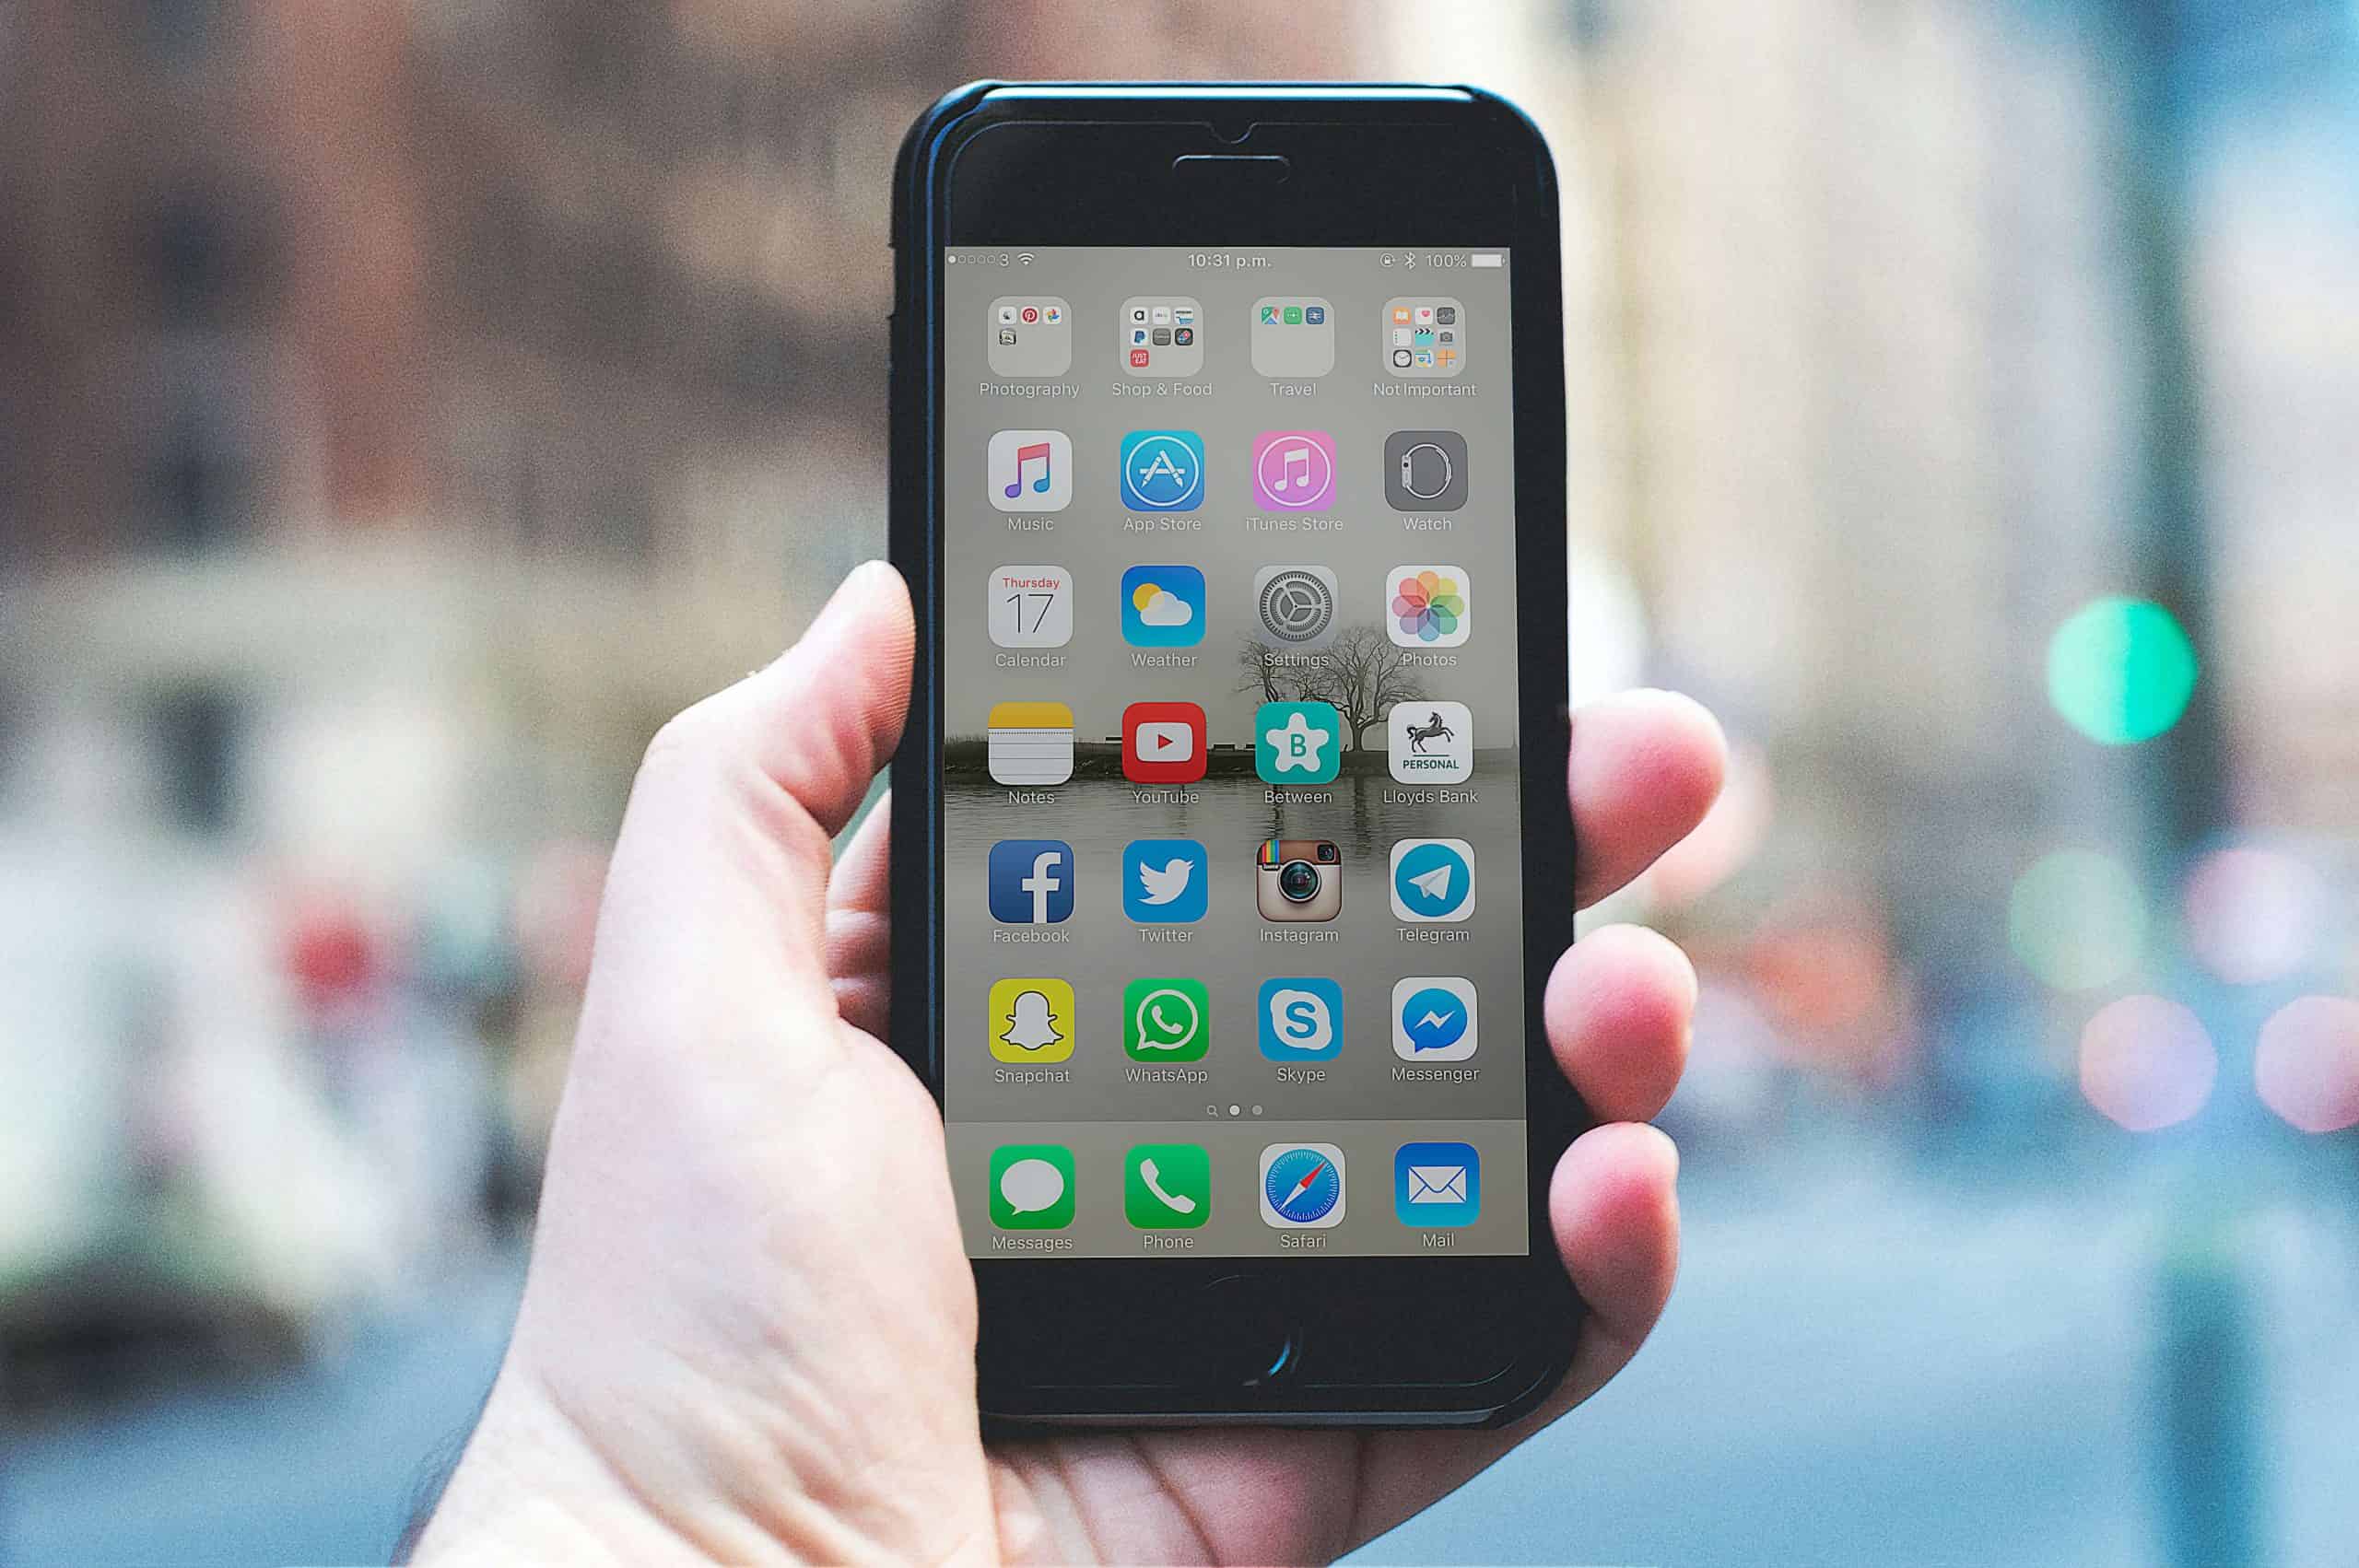 Apps for marketers worth having on your phone